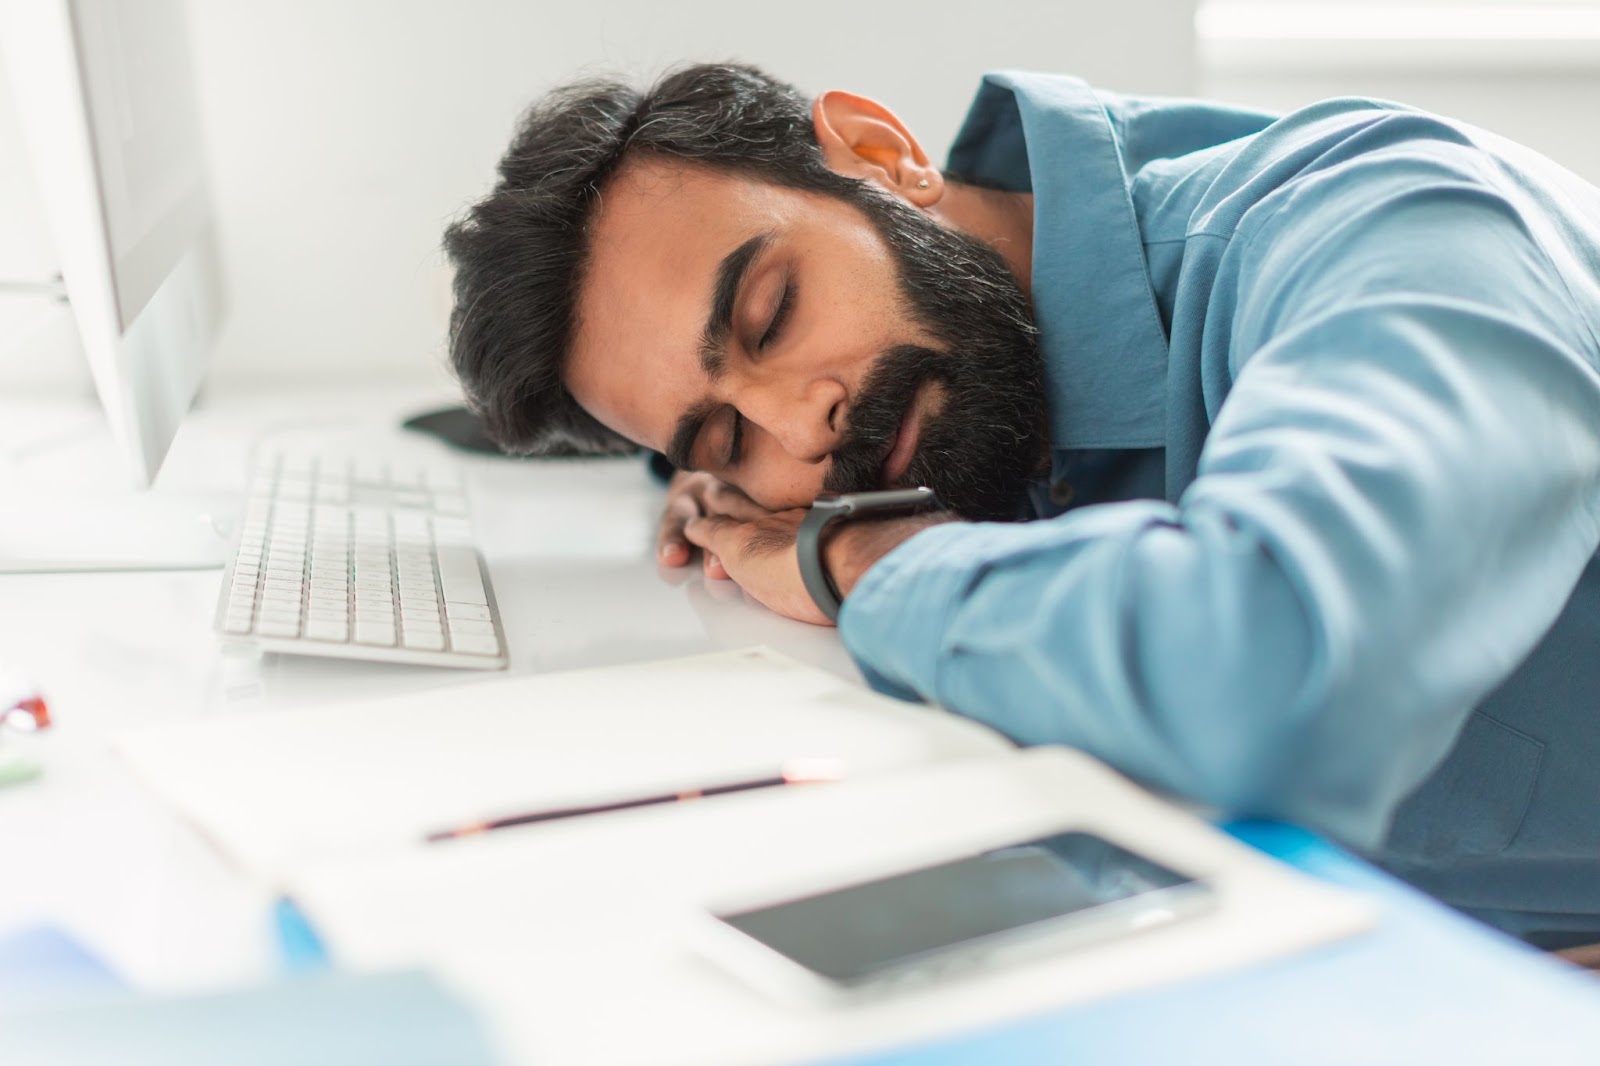 Man sleeping at computer during downtime of business server upgrade